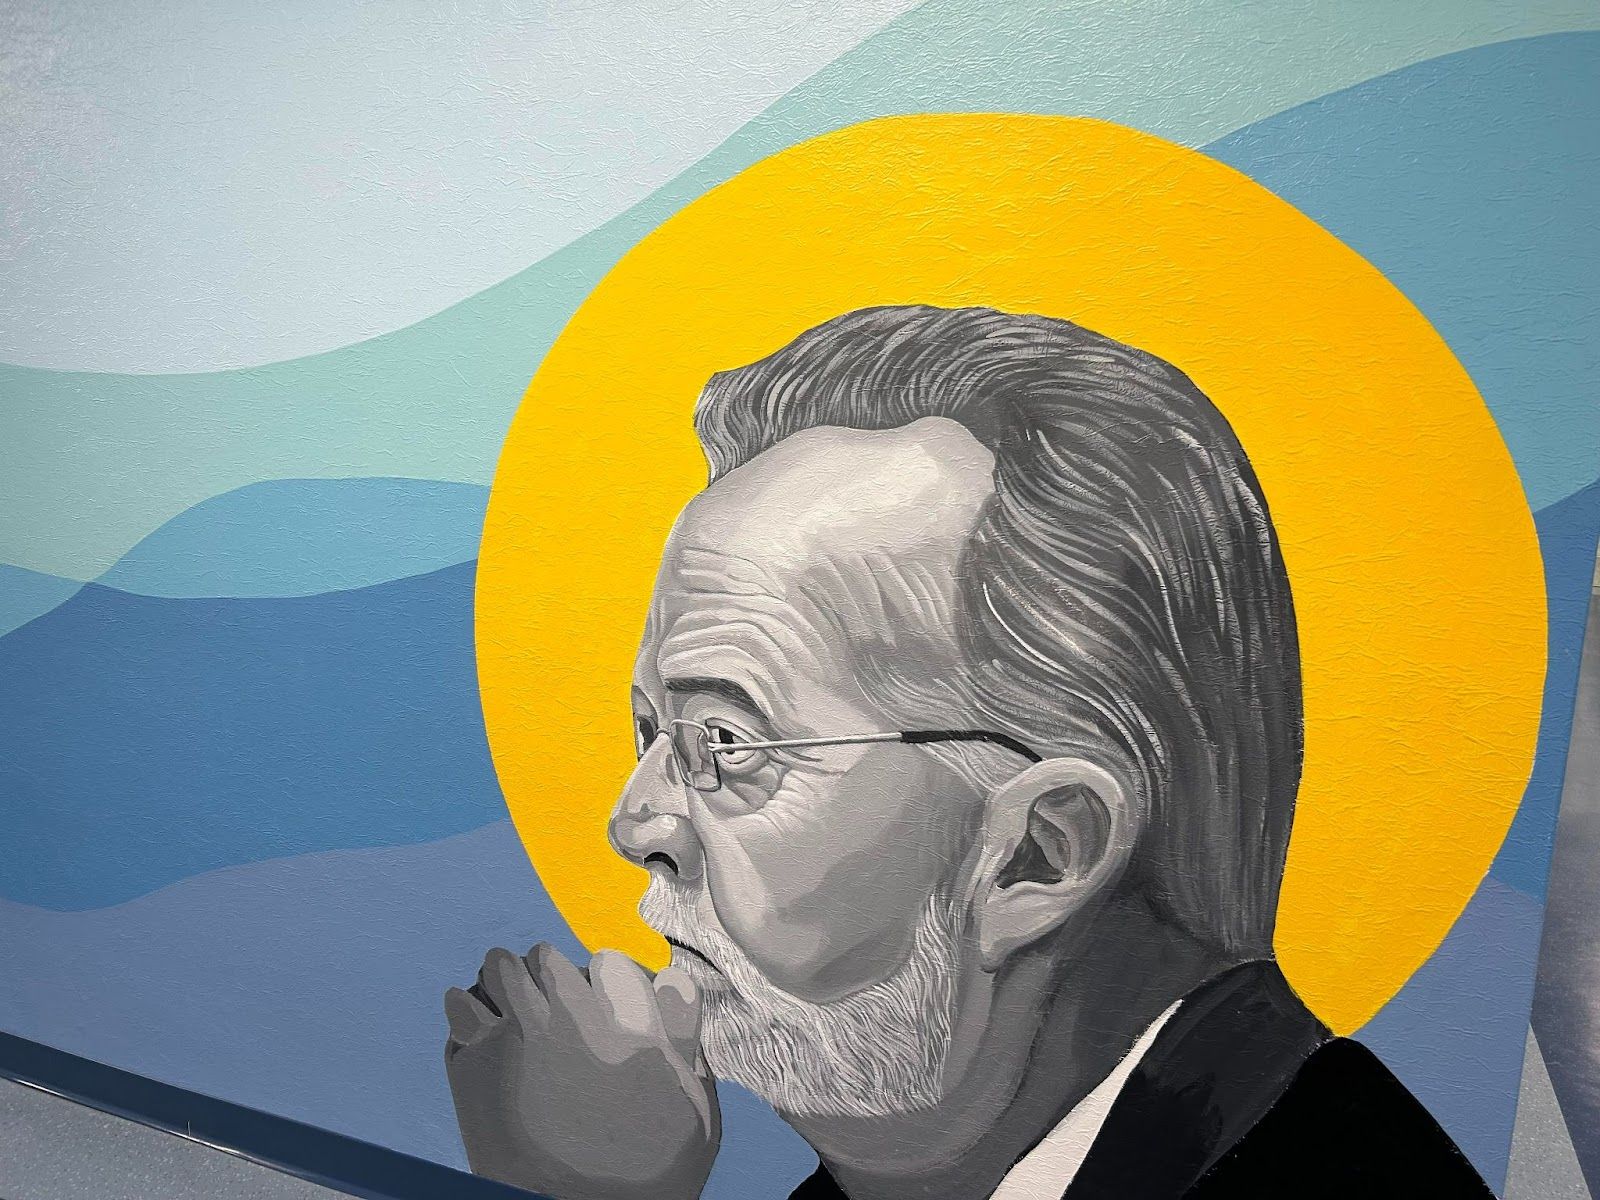 Former Atlantic City Mayor, Assemblyman and State Senator Jim Whelan is also depicted on mural. Source: City of Atlantic City